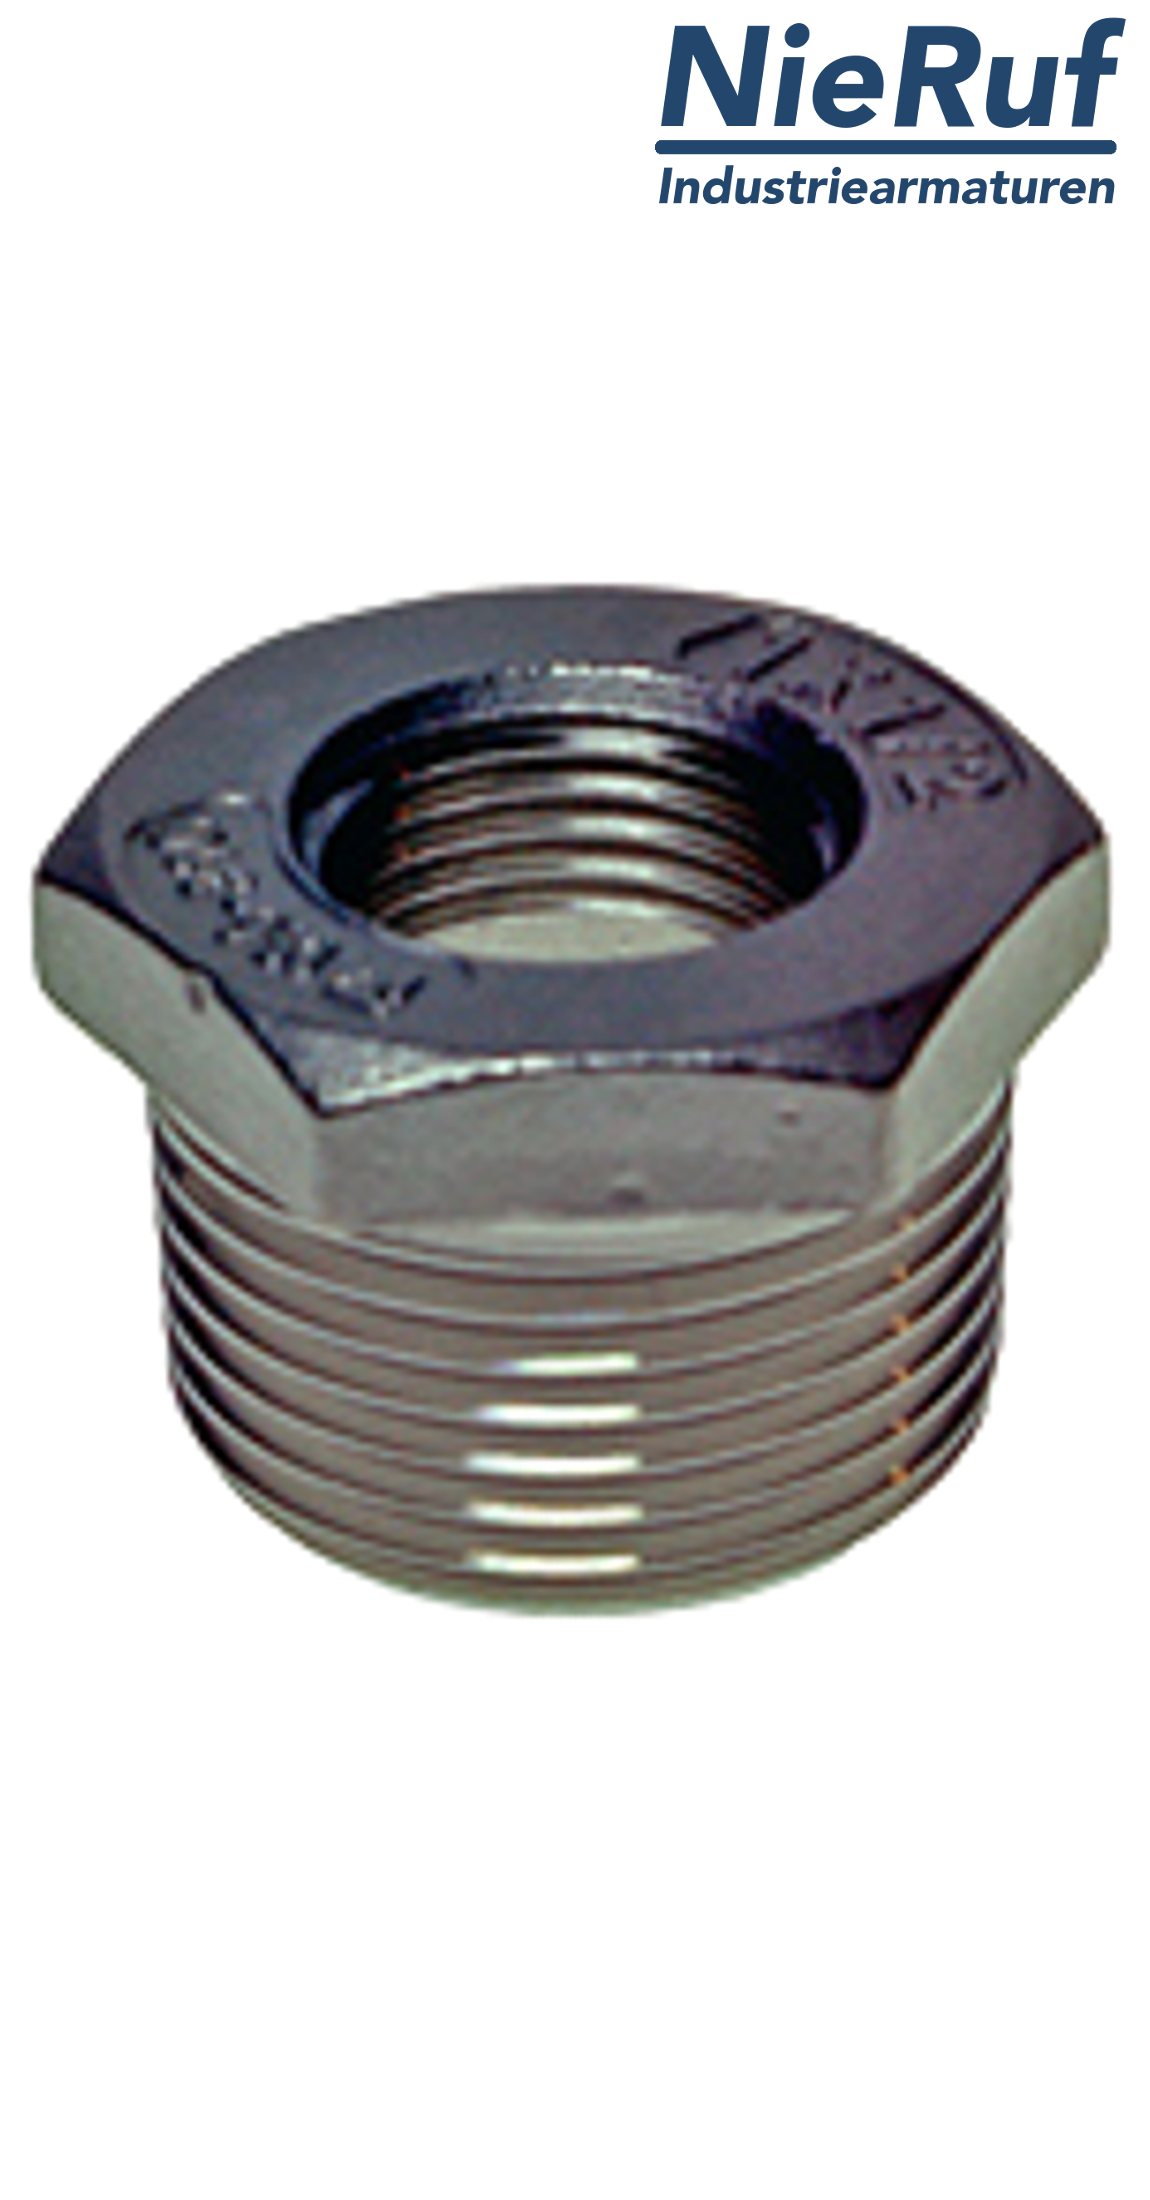 reducing bush 3/4" x 1/2" inch NPT male X female stainless steel 316L